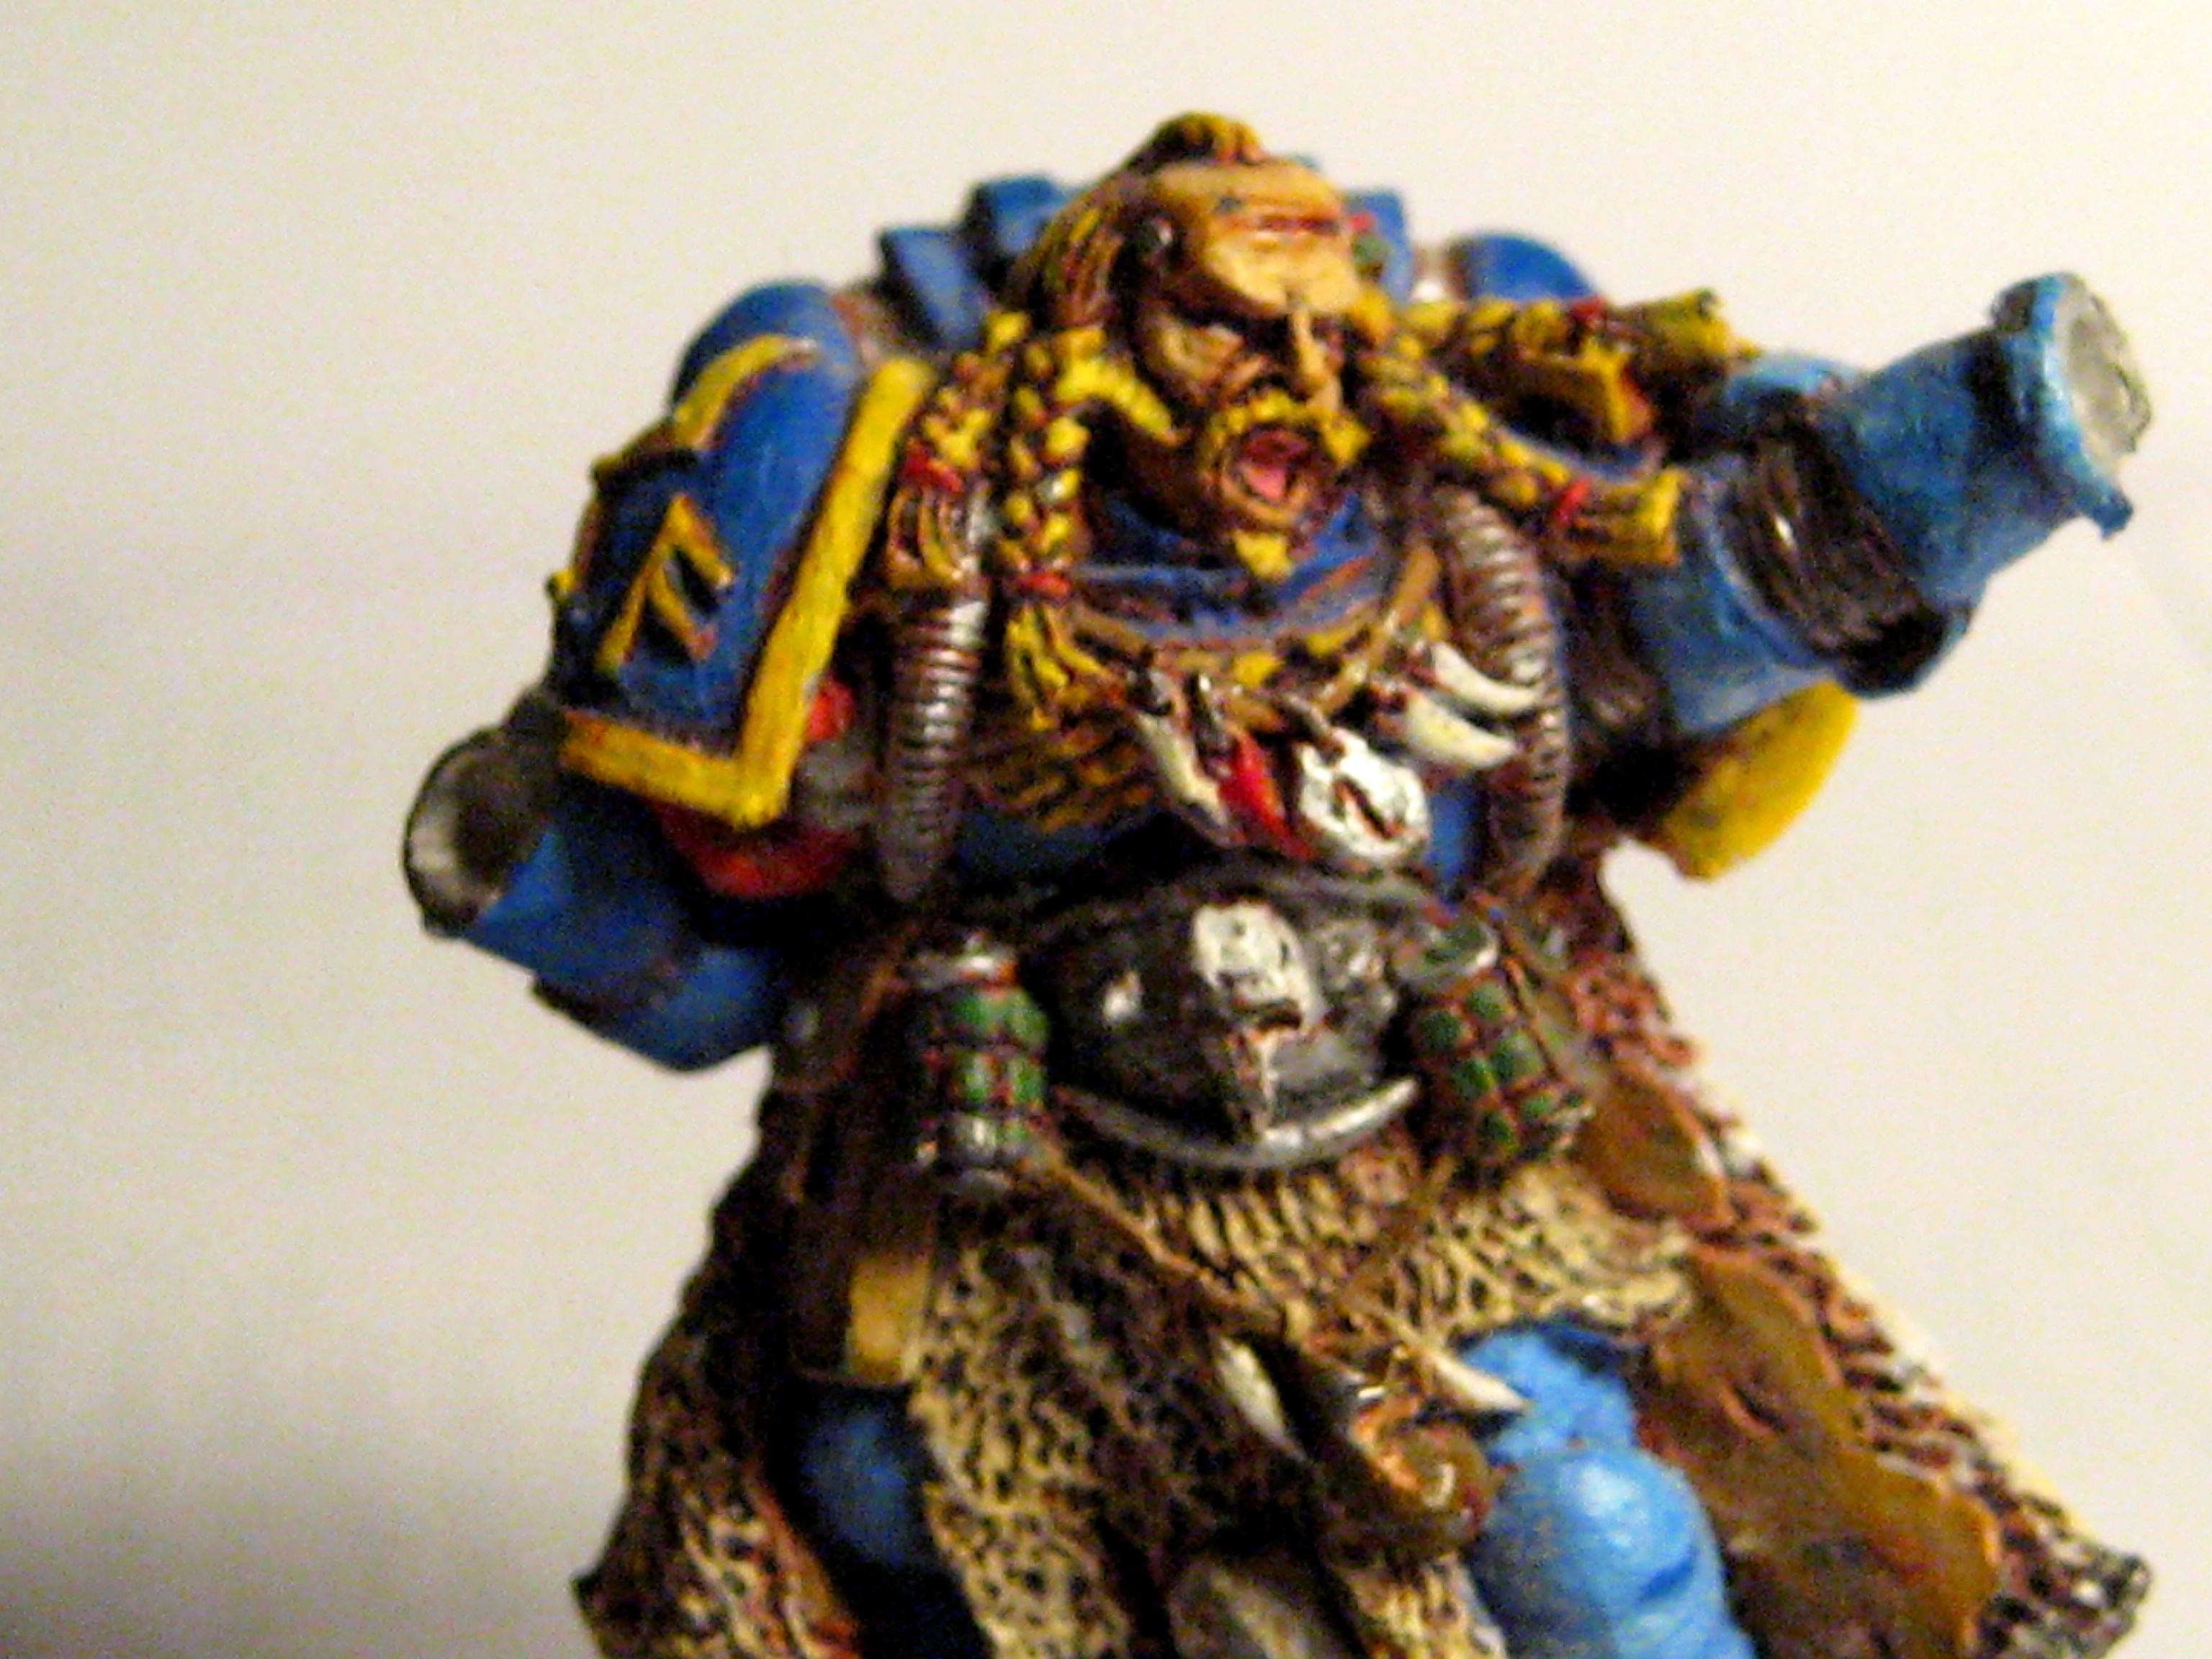 First, Painting, Space Marines, Wolves